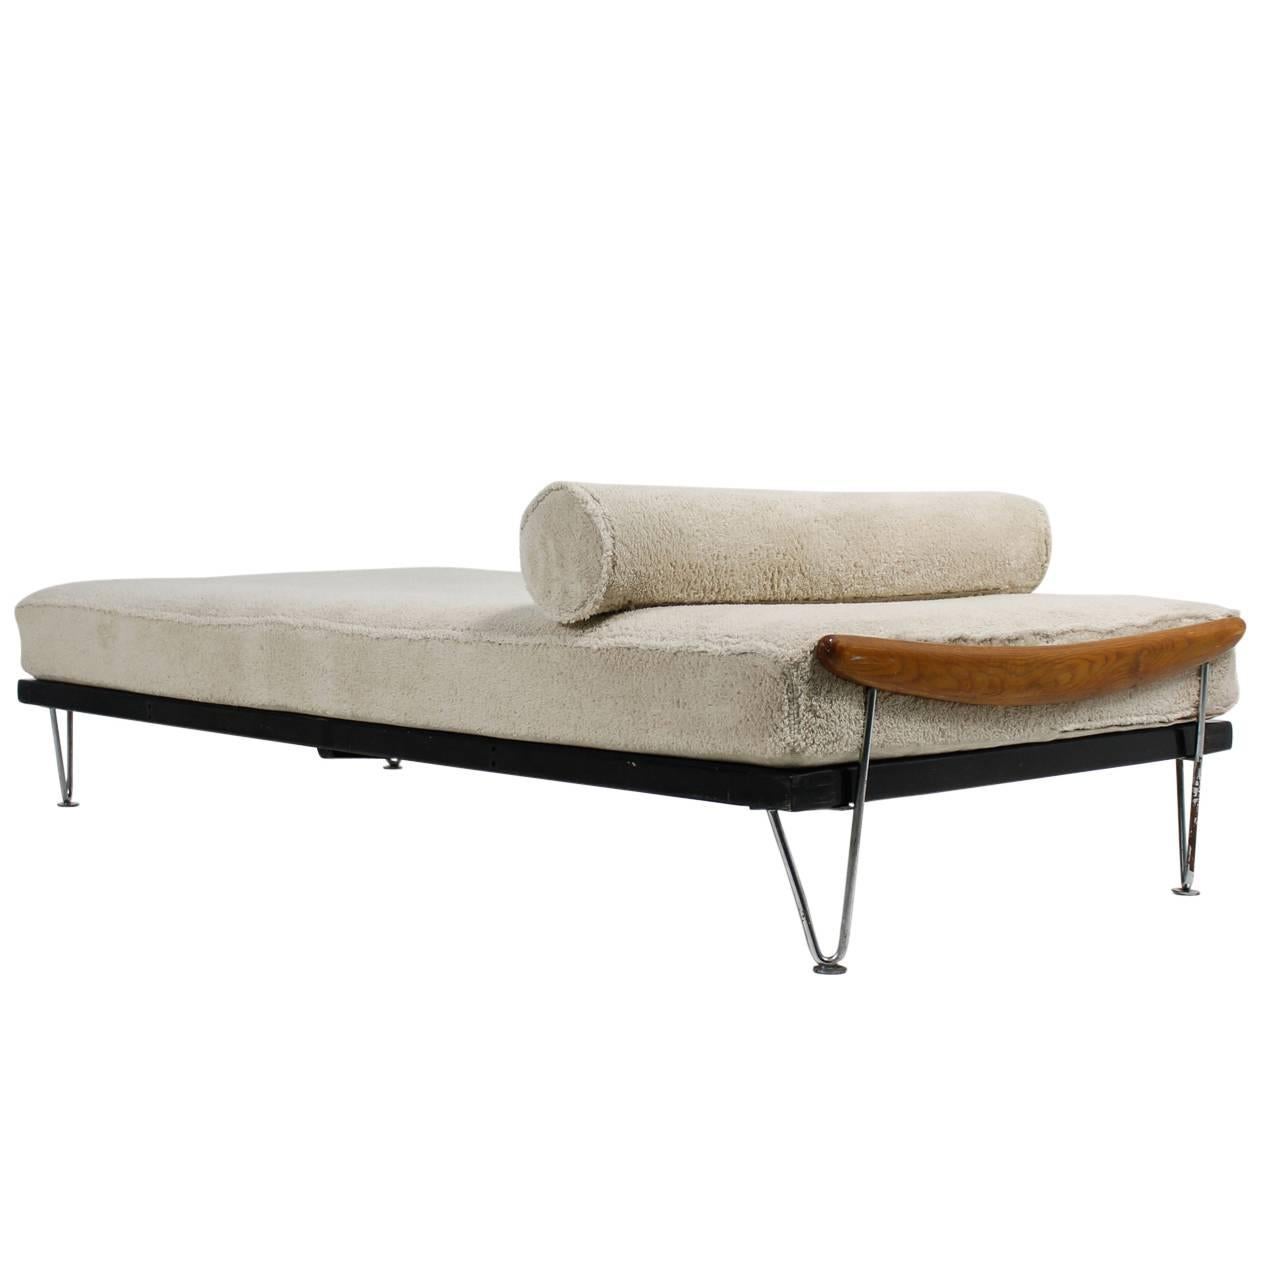 Amazing Mid-Century Daybed Sofa by Fred Ruf 1950s with Teddy Bear Fur Upholstery